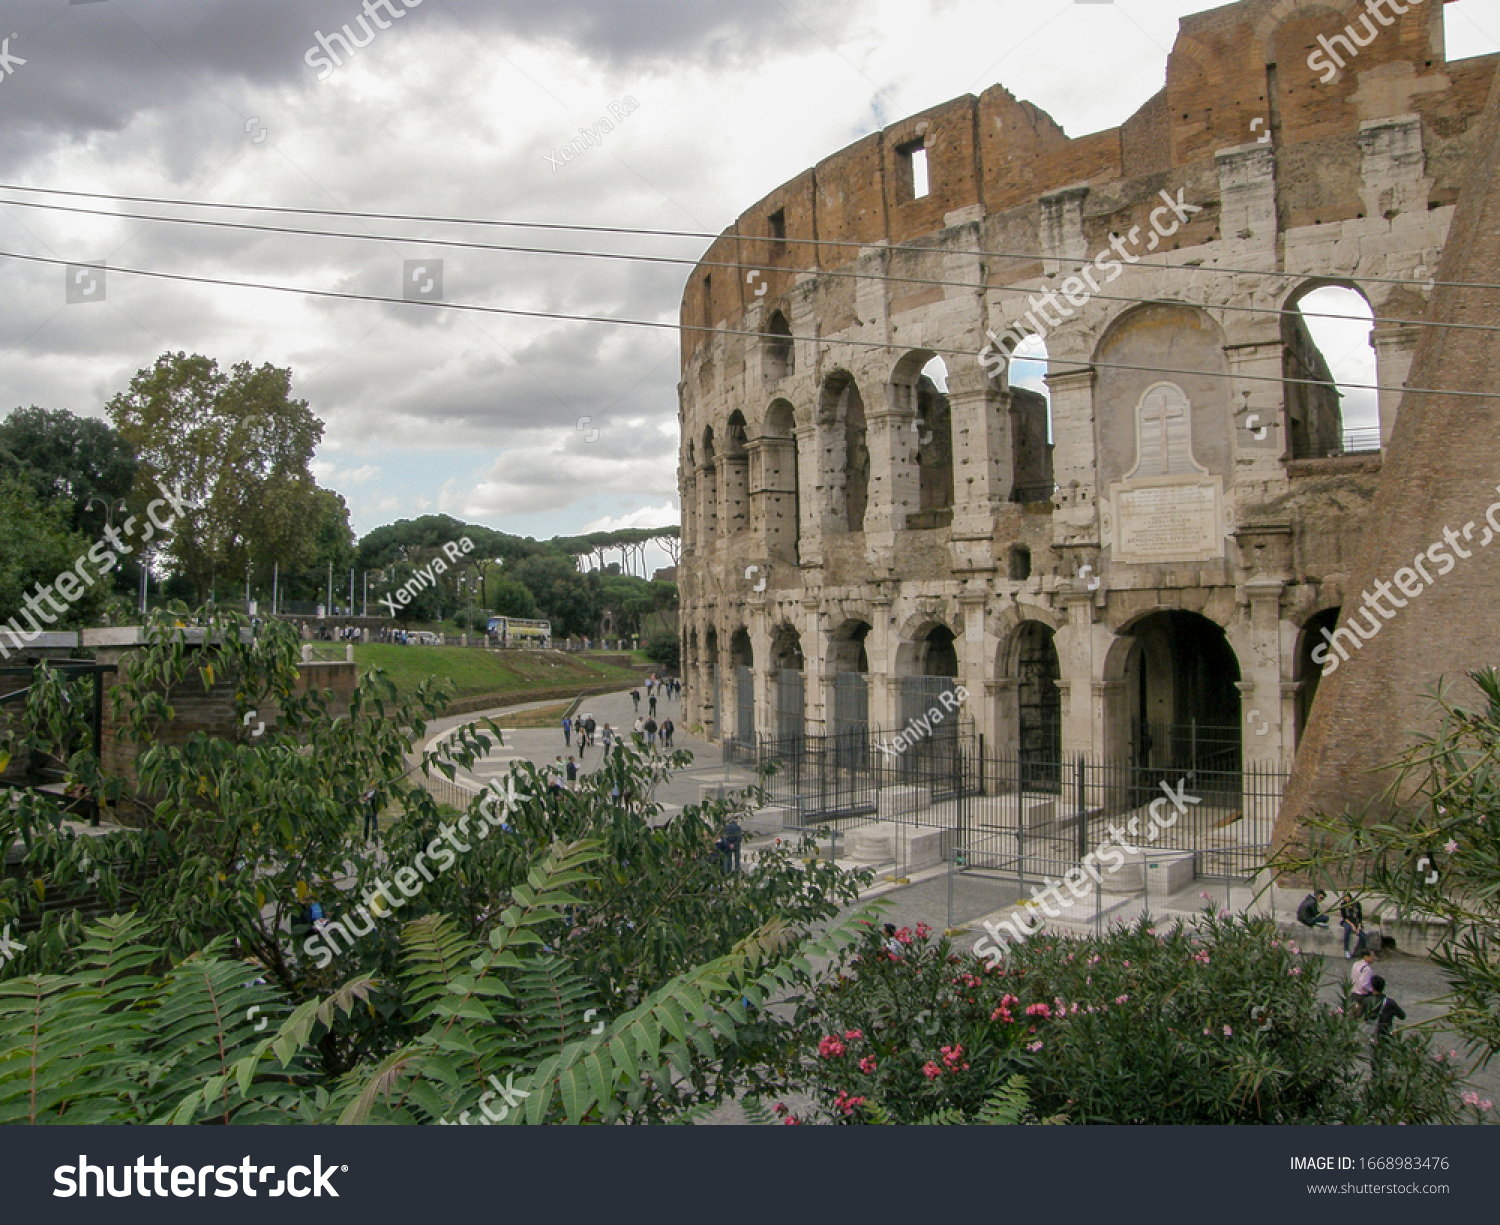 Top view of the Colosseum with a cloudy sky in the background #1668983476